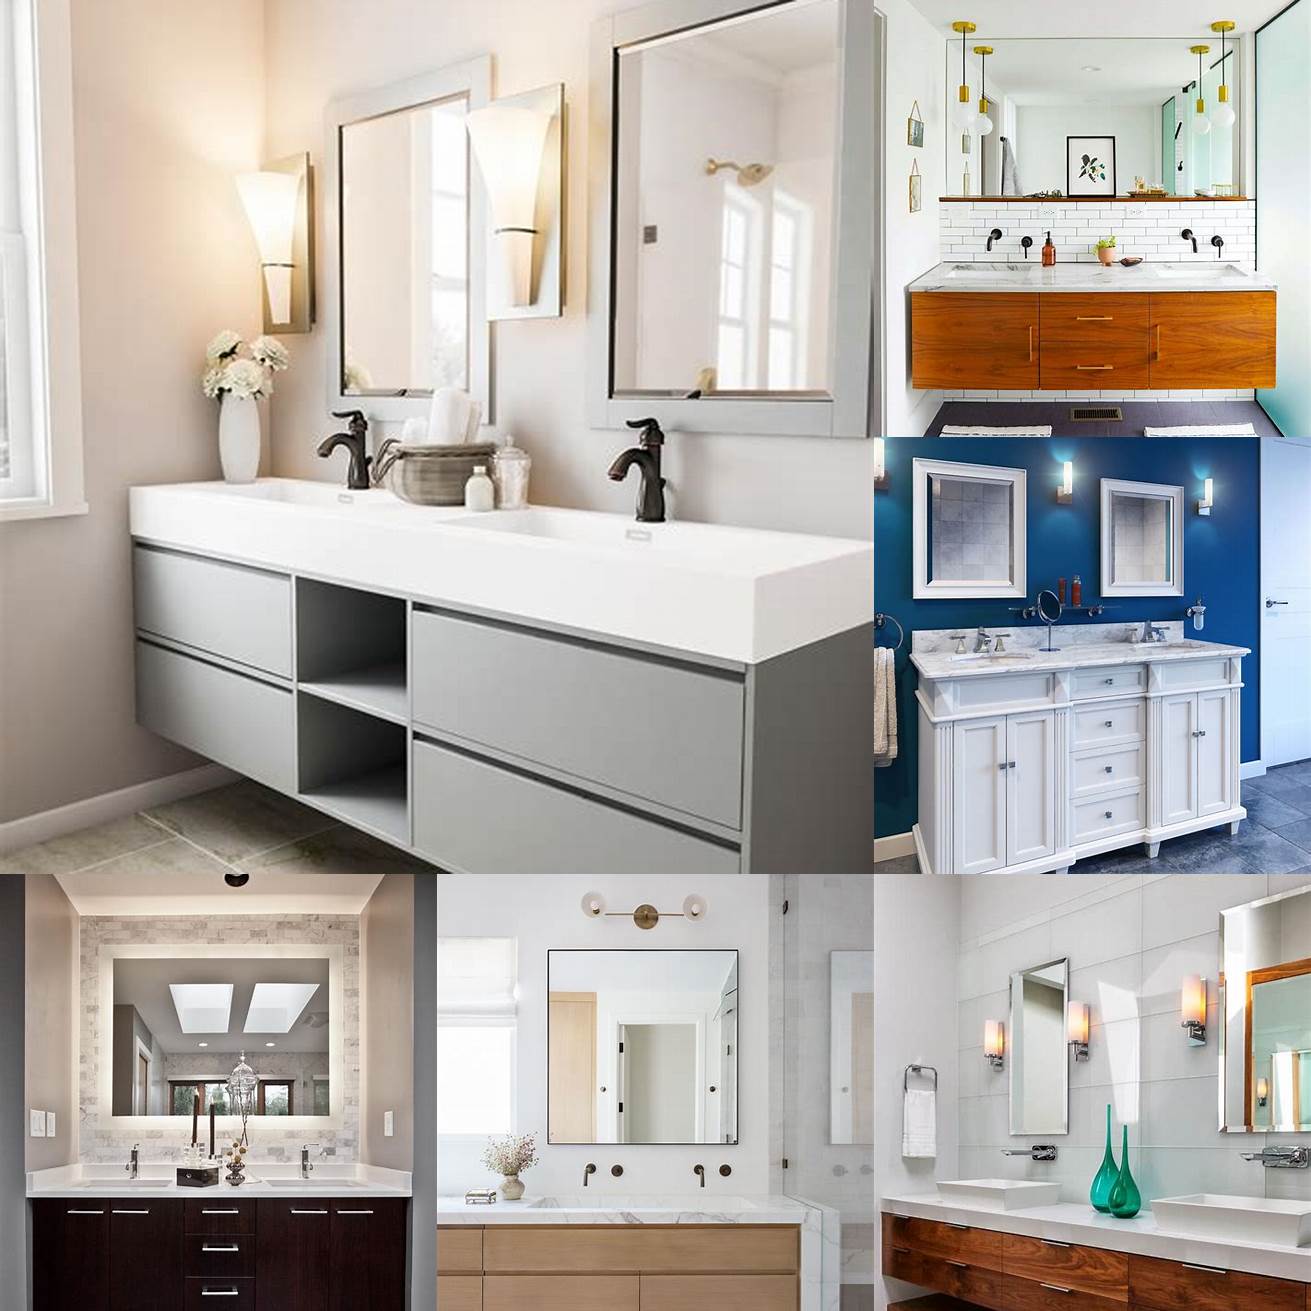 A modern guest bathroom vanity with a sleek finish and clean lines